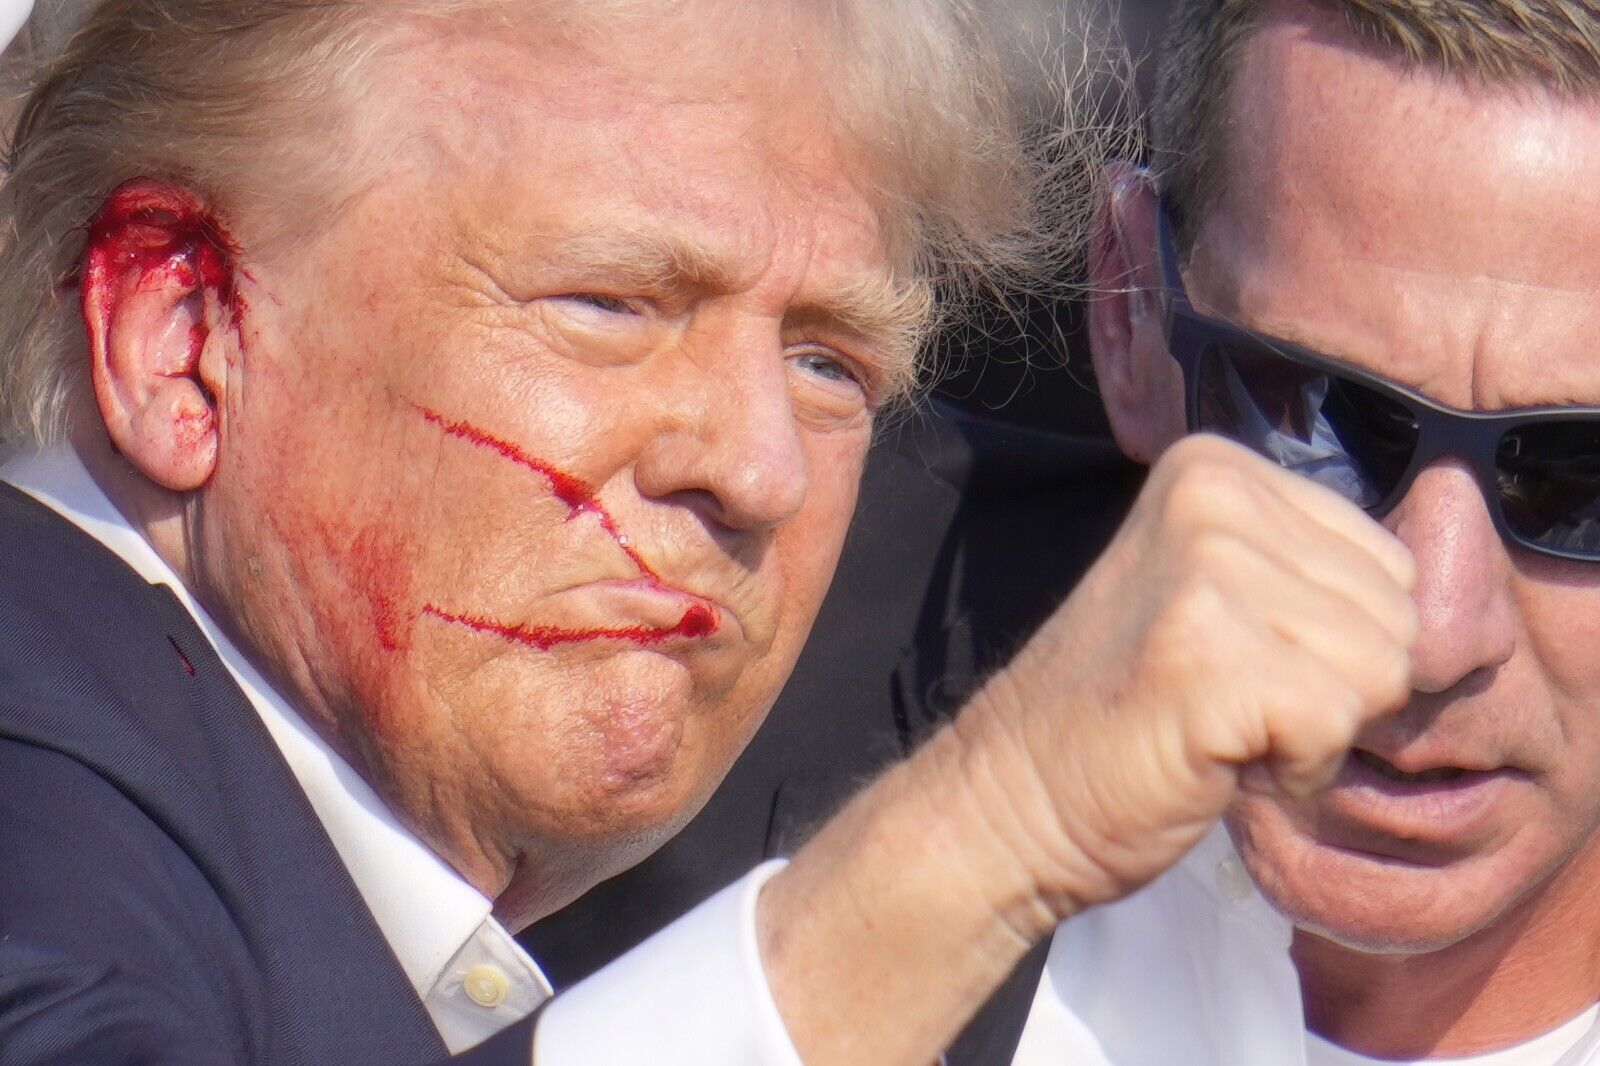 TRUMP CLOSE UP AFTER BEING SHOT 8x10 Glossy Printed Photo